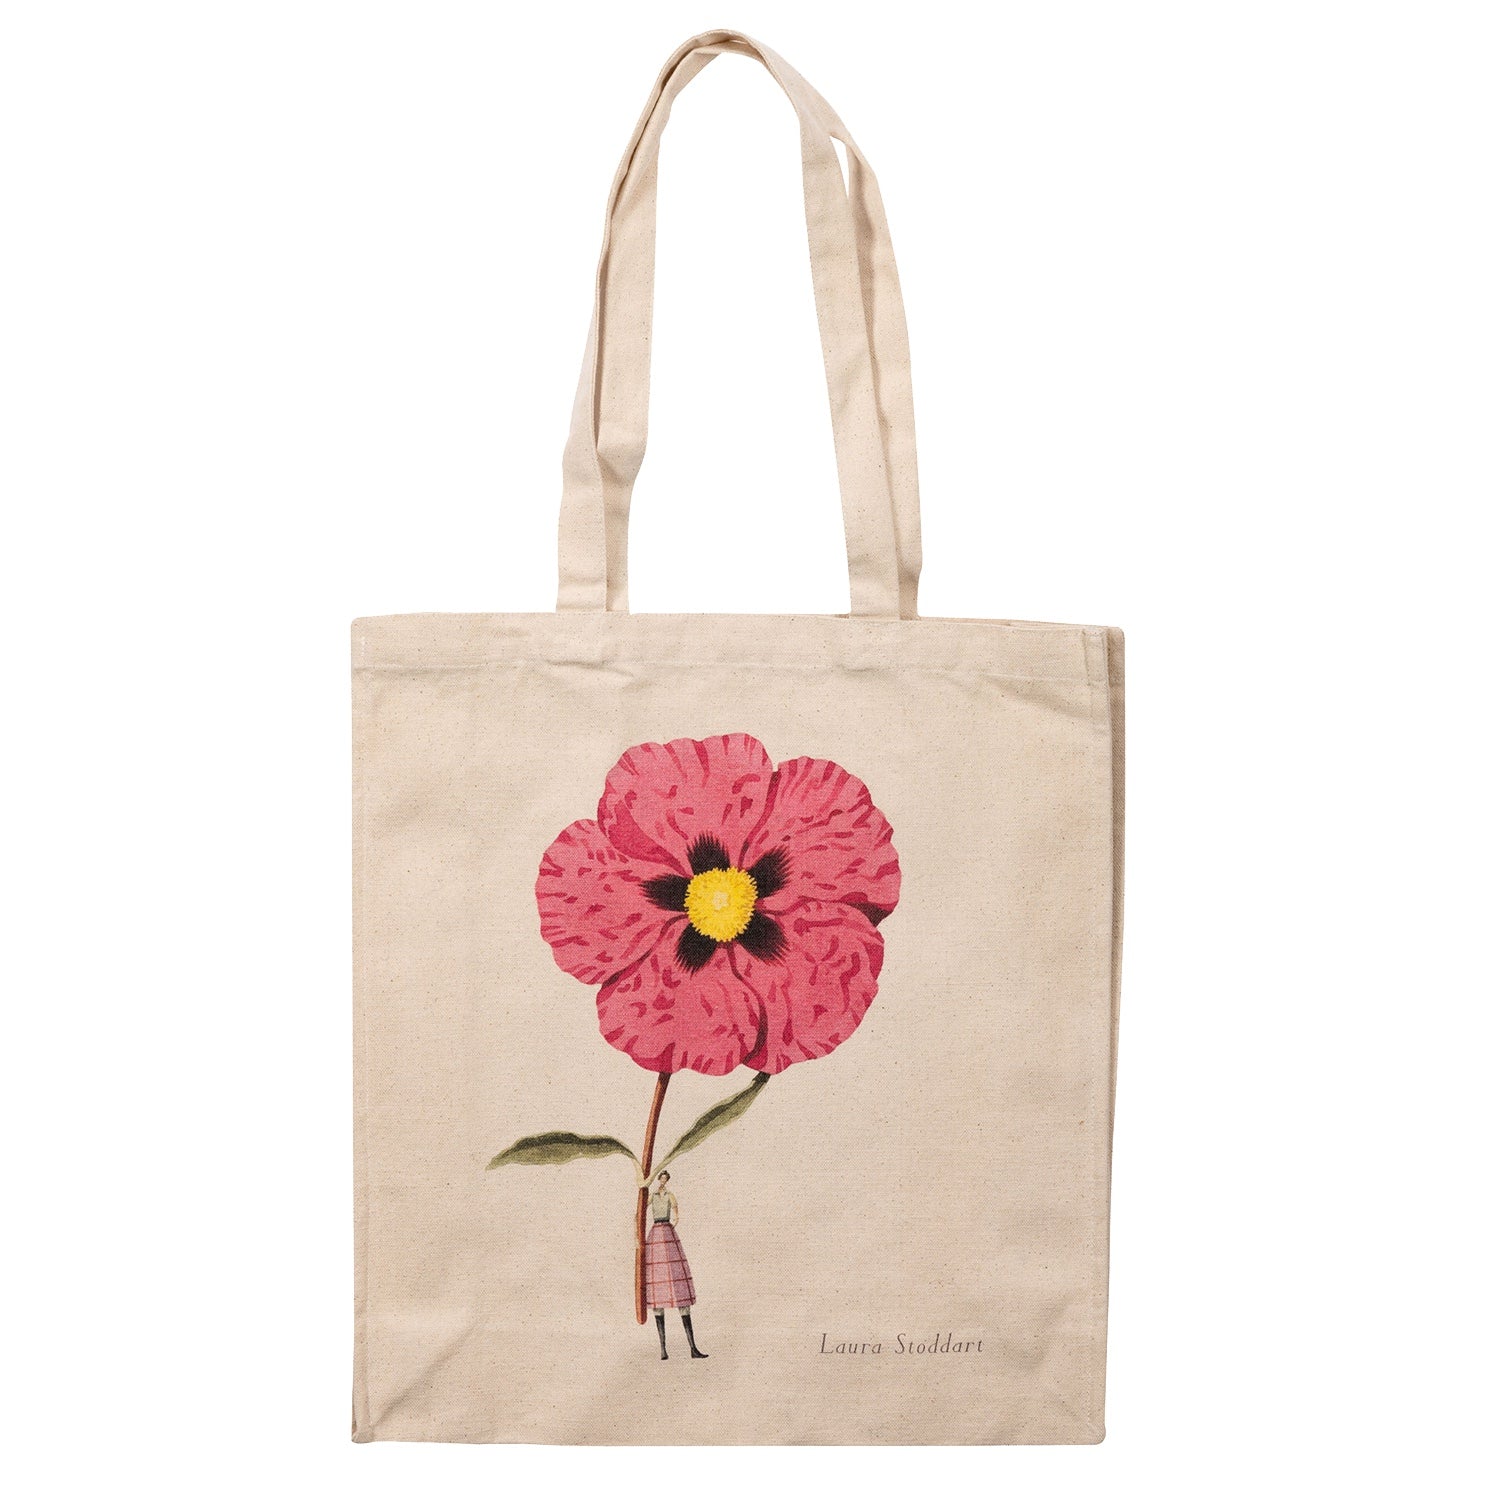 The Cistus Heavyweight Canvas Tote Bag is light tan featuring a stylized illustration of a woman holding a gigantic pink cistus bloom by the stem.